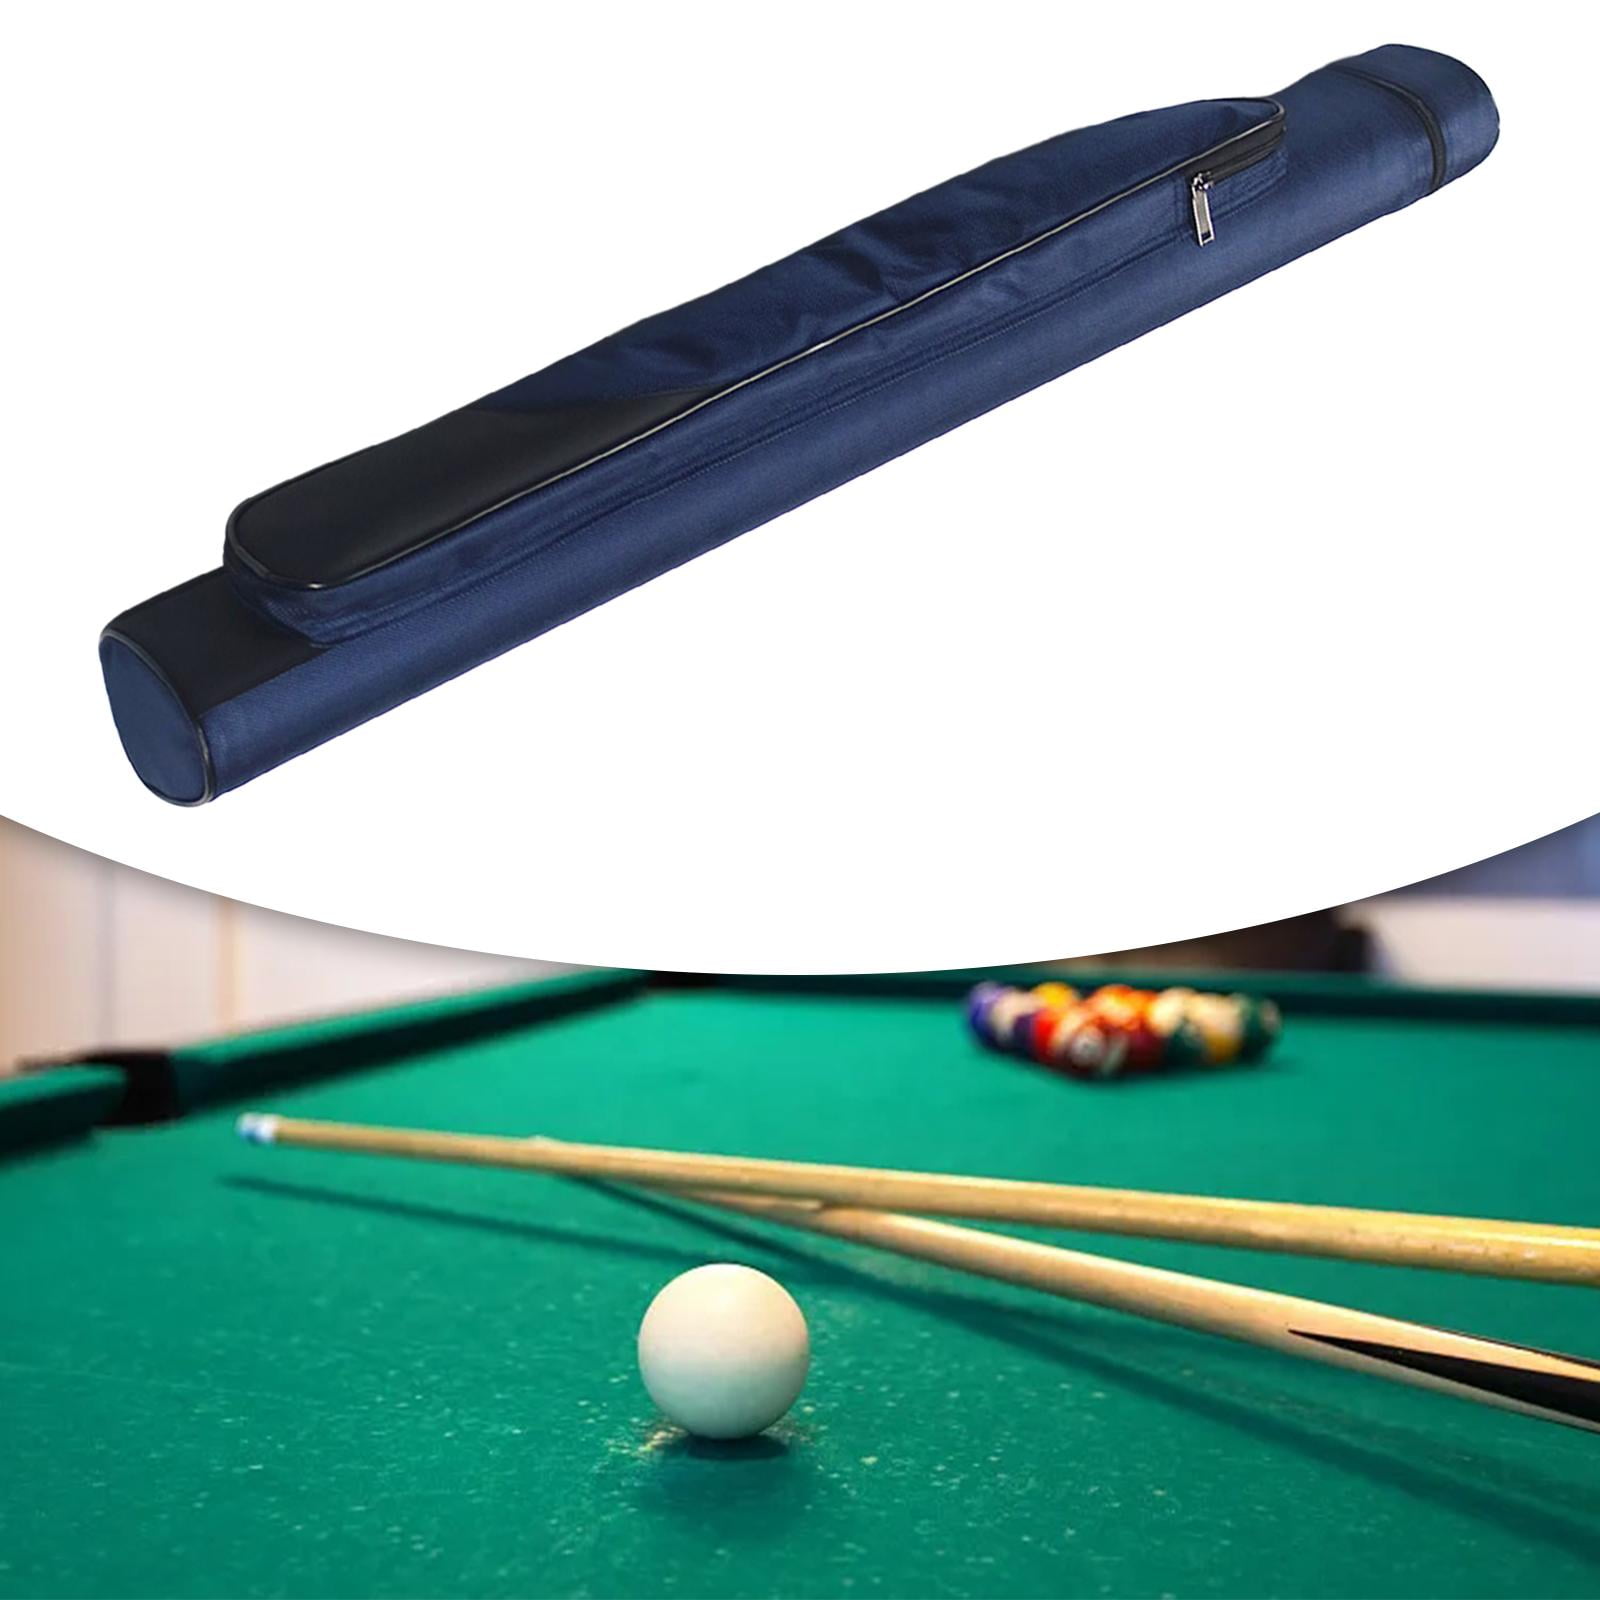 Amazon.com : Cosmos Cue Stick Carrying Bag for 1/2 Billiard Stick Storage,  32 Inches Black Color, with Mini Zipper Storage Pouch : Sports & Outdoors